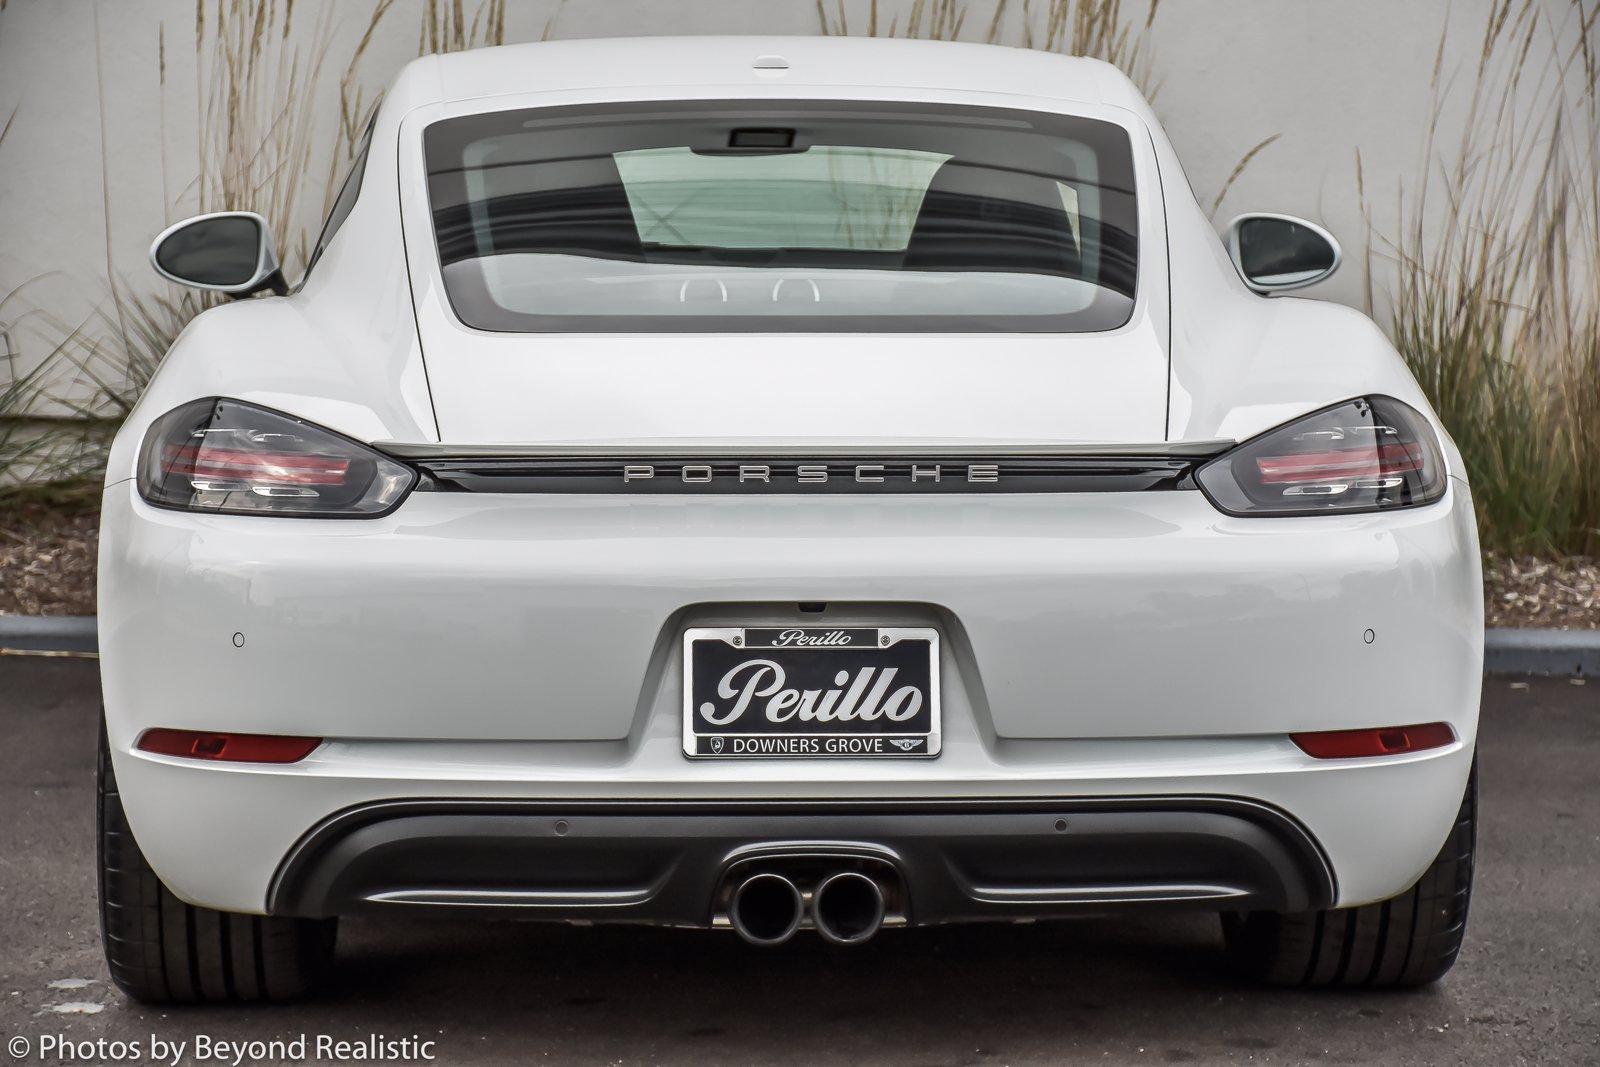 Used 2018 Porsche 718 Cayman  | Downers Grove, IL